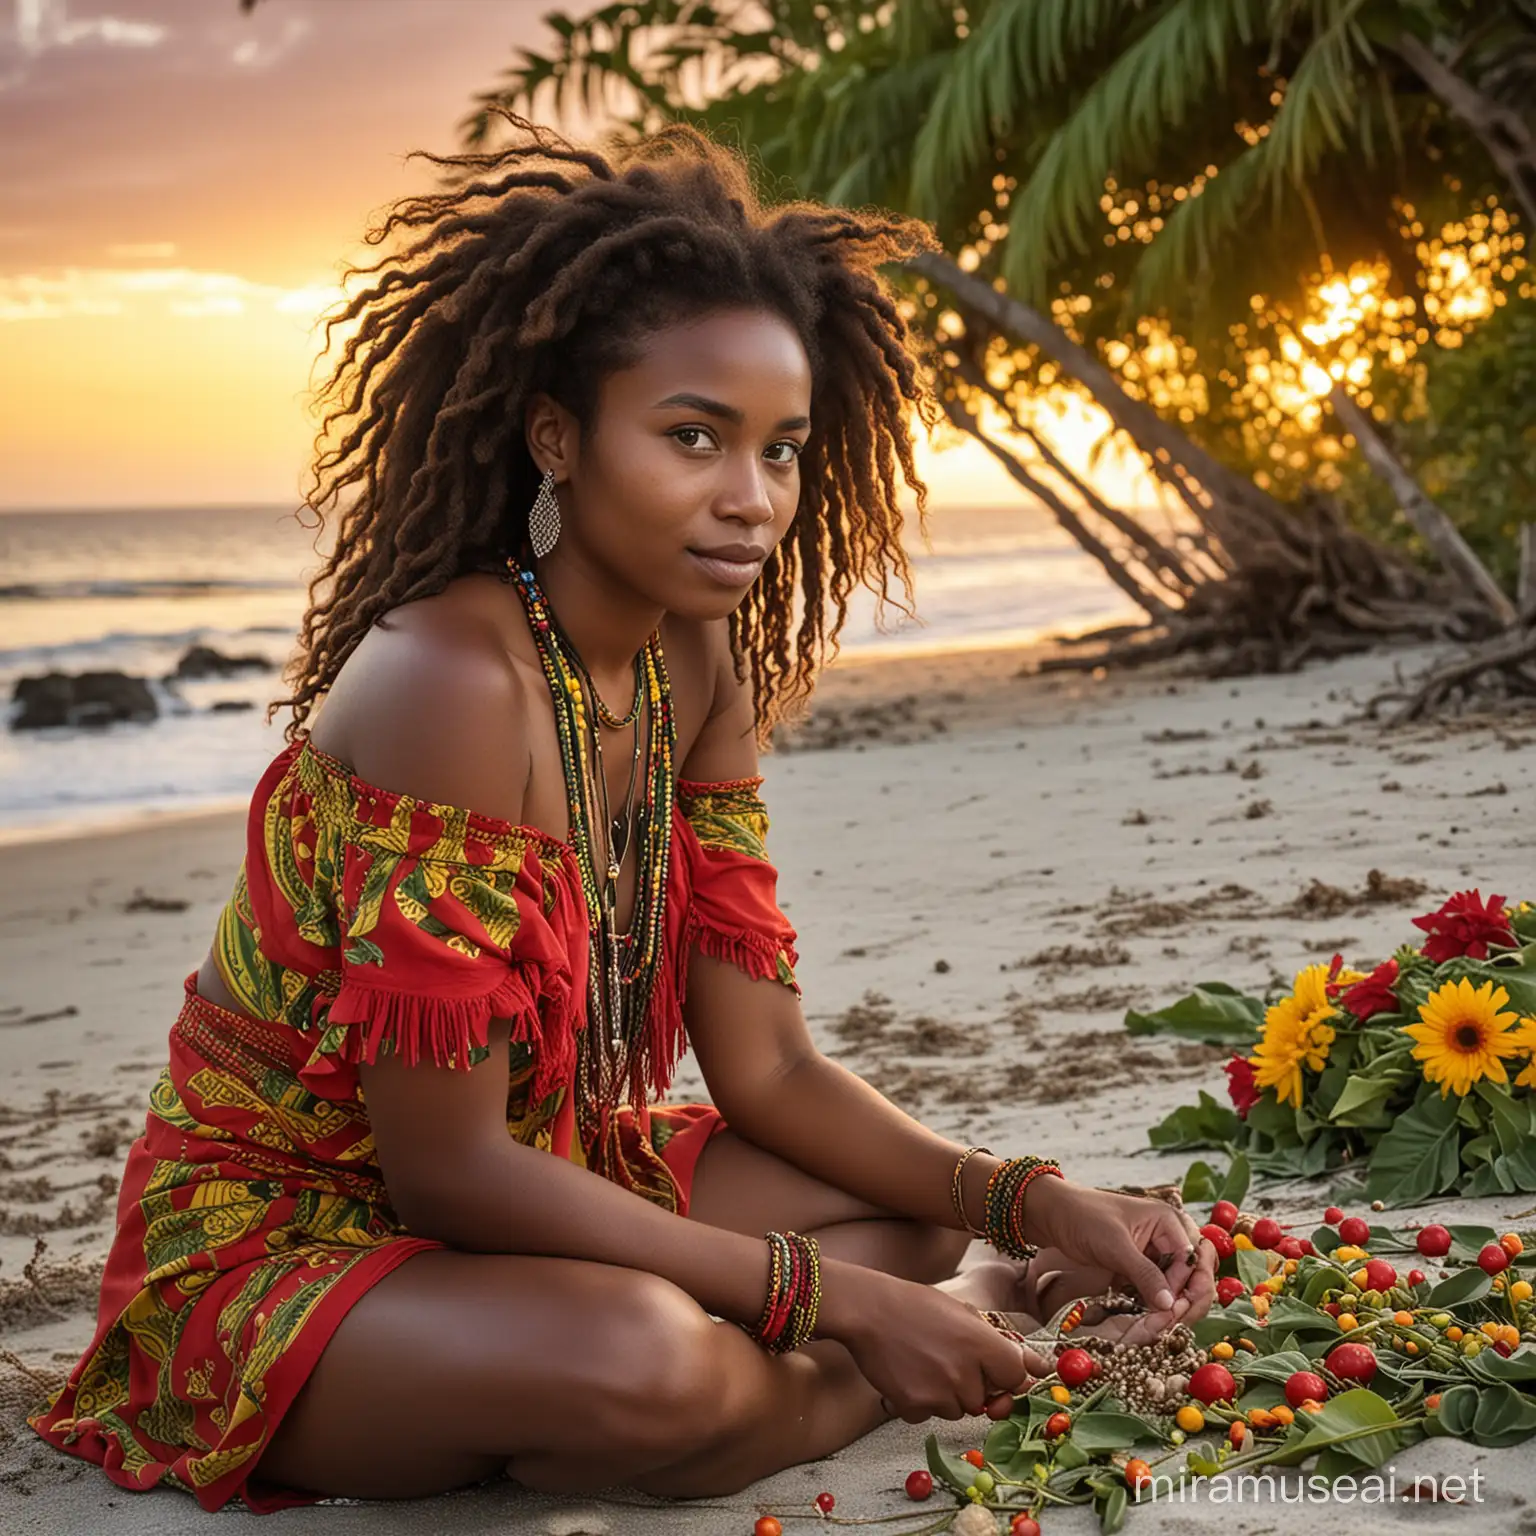 real photo: Papuan girls aged around 20 to 25 years, black skinned with curly hair or dreadlocks and beautiful faces wearing red, yellow and green clothes, sitting while making jewelry from leaves and flowers on the beach at a beautiful sunset